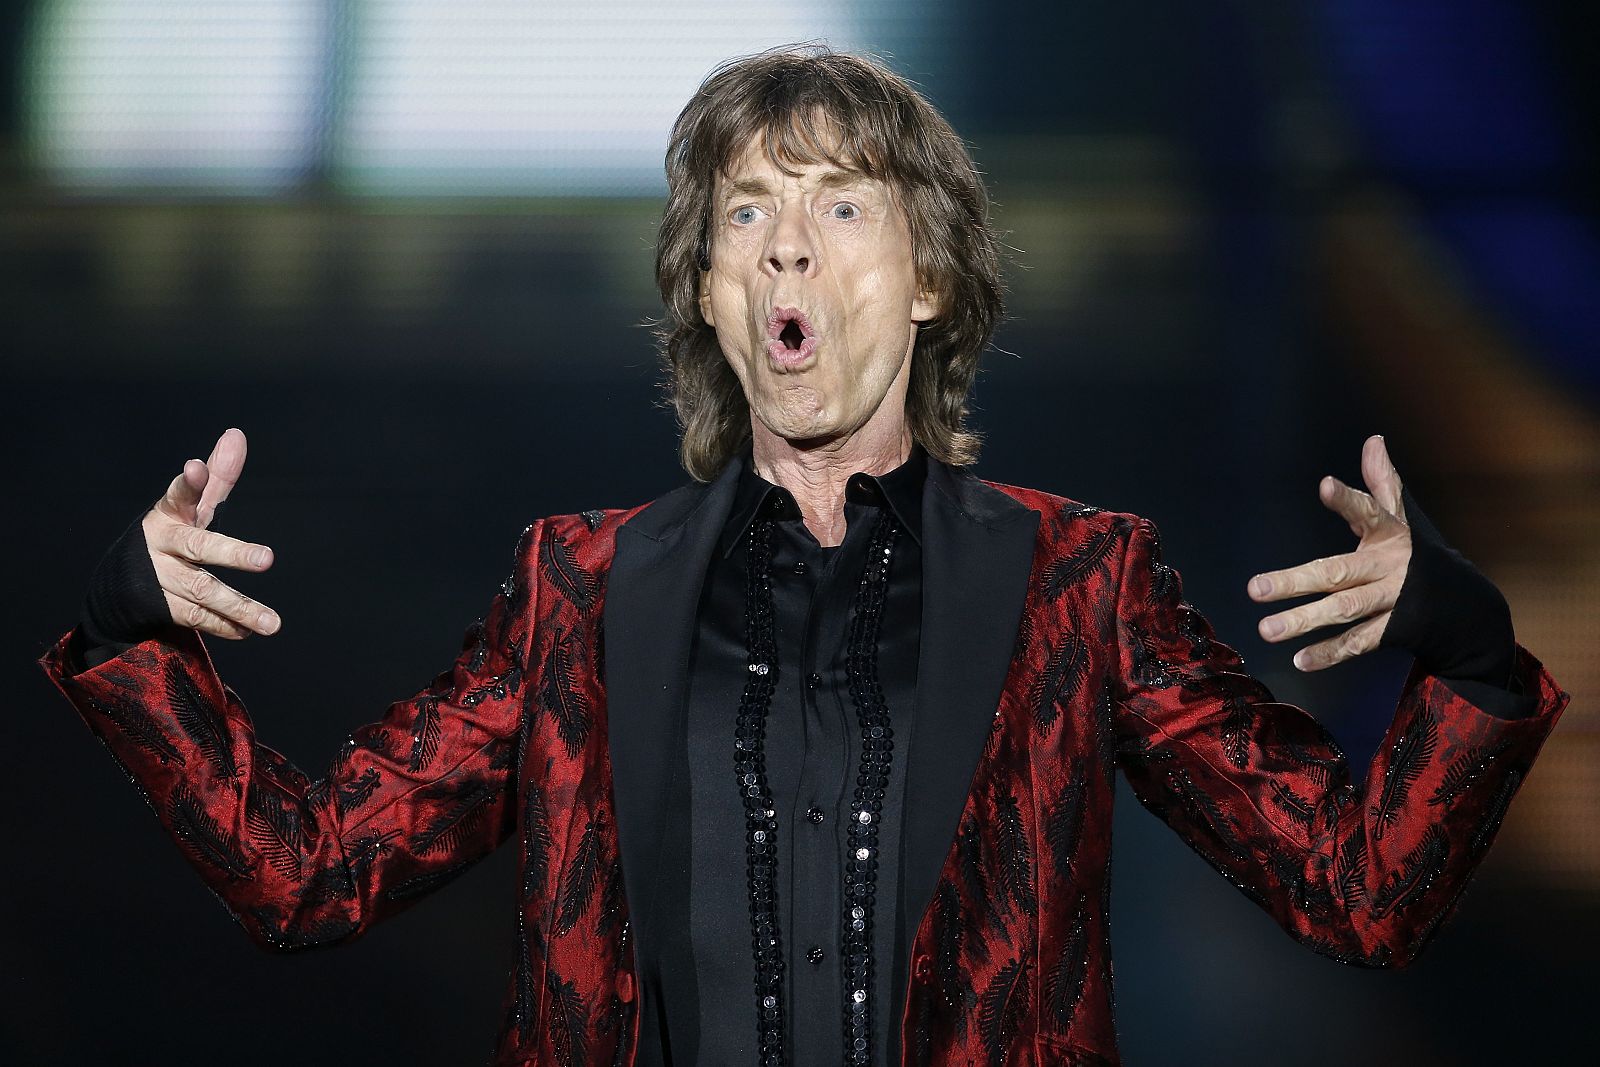 Mick Jagger of The Rolling Stones performs during their "14 on Fire" concert in Madrid